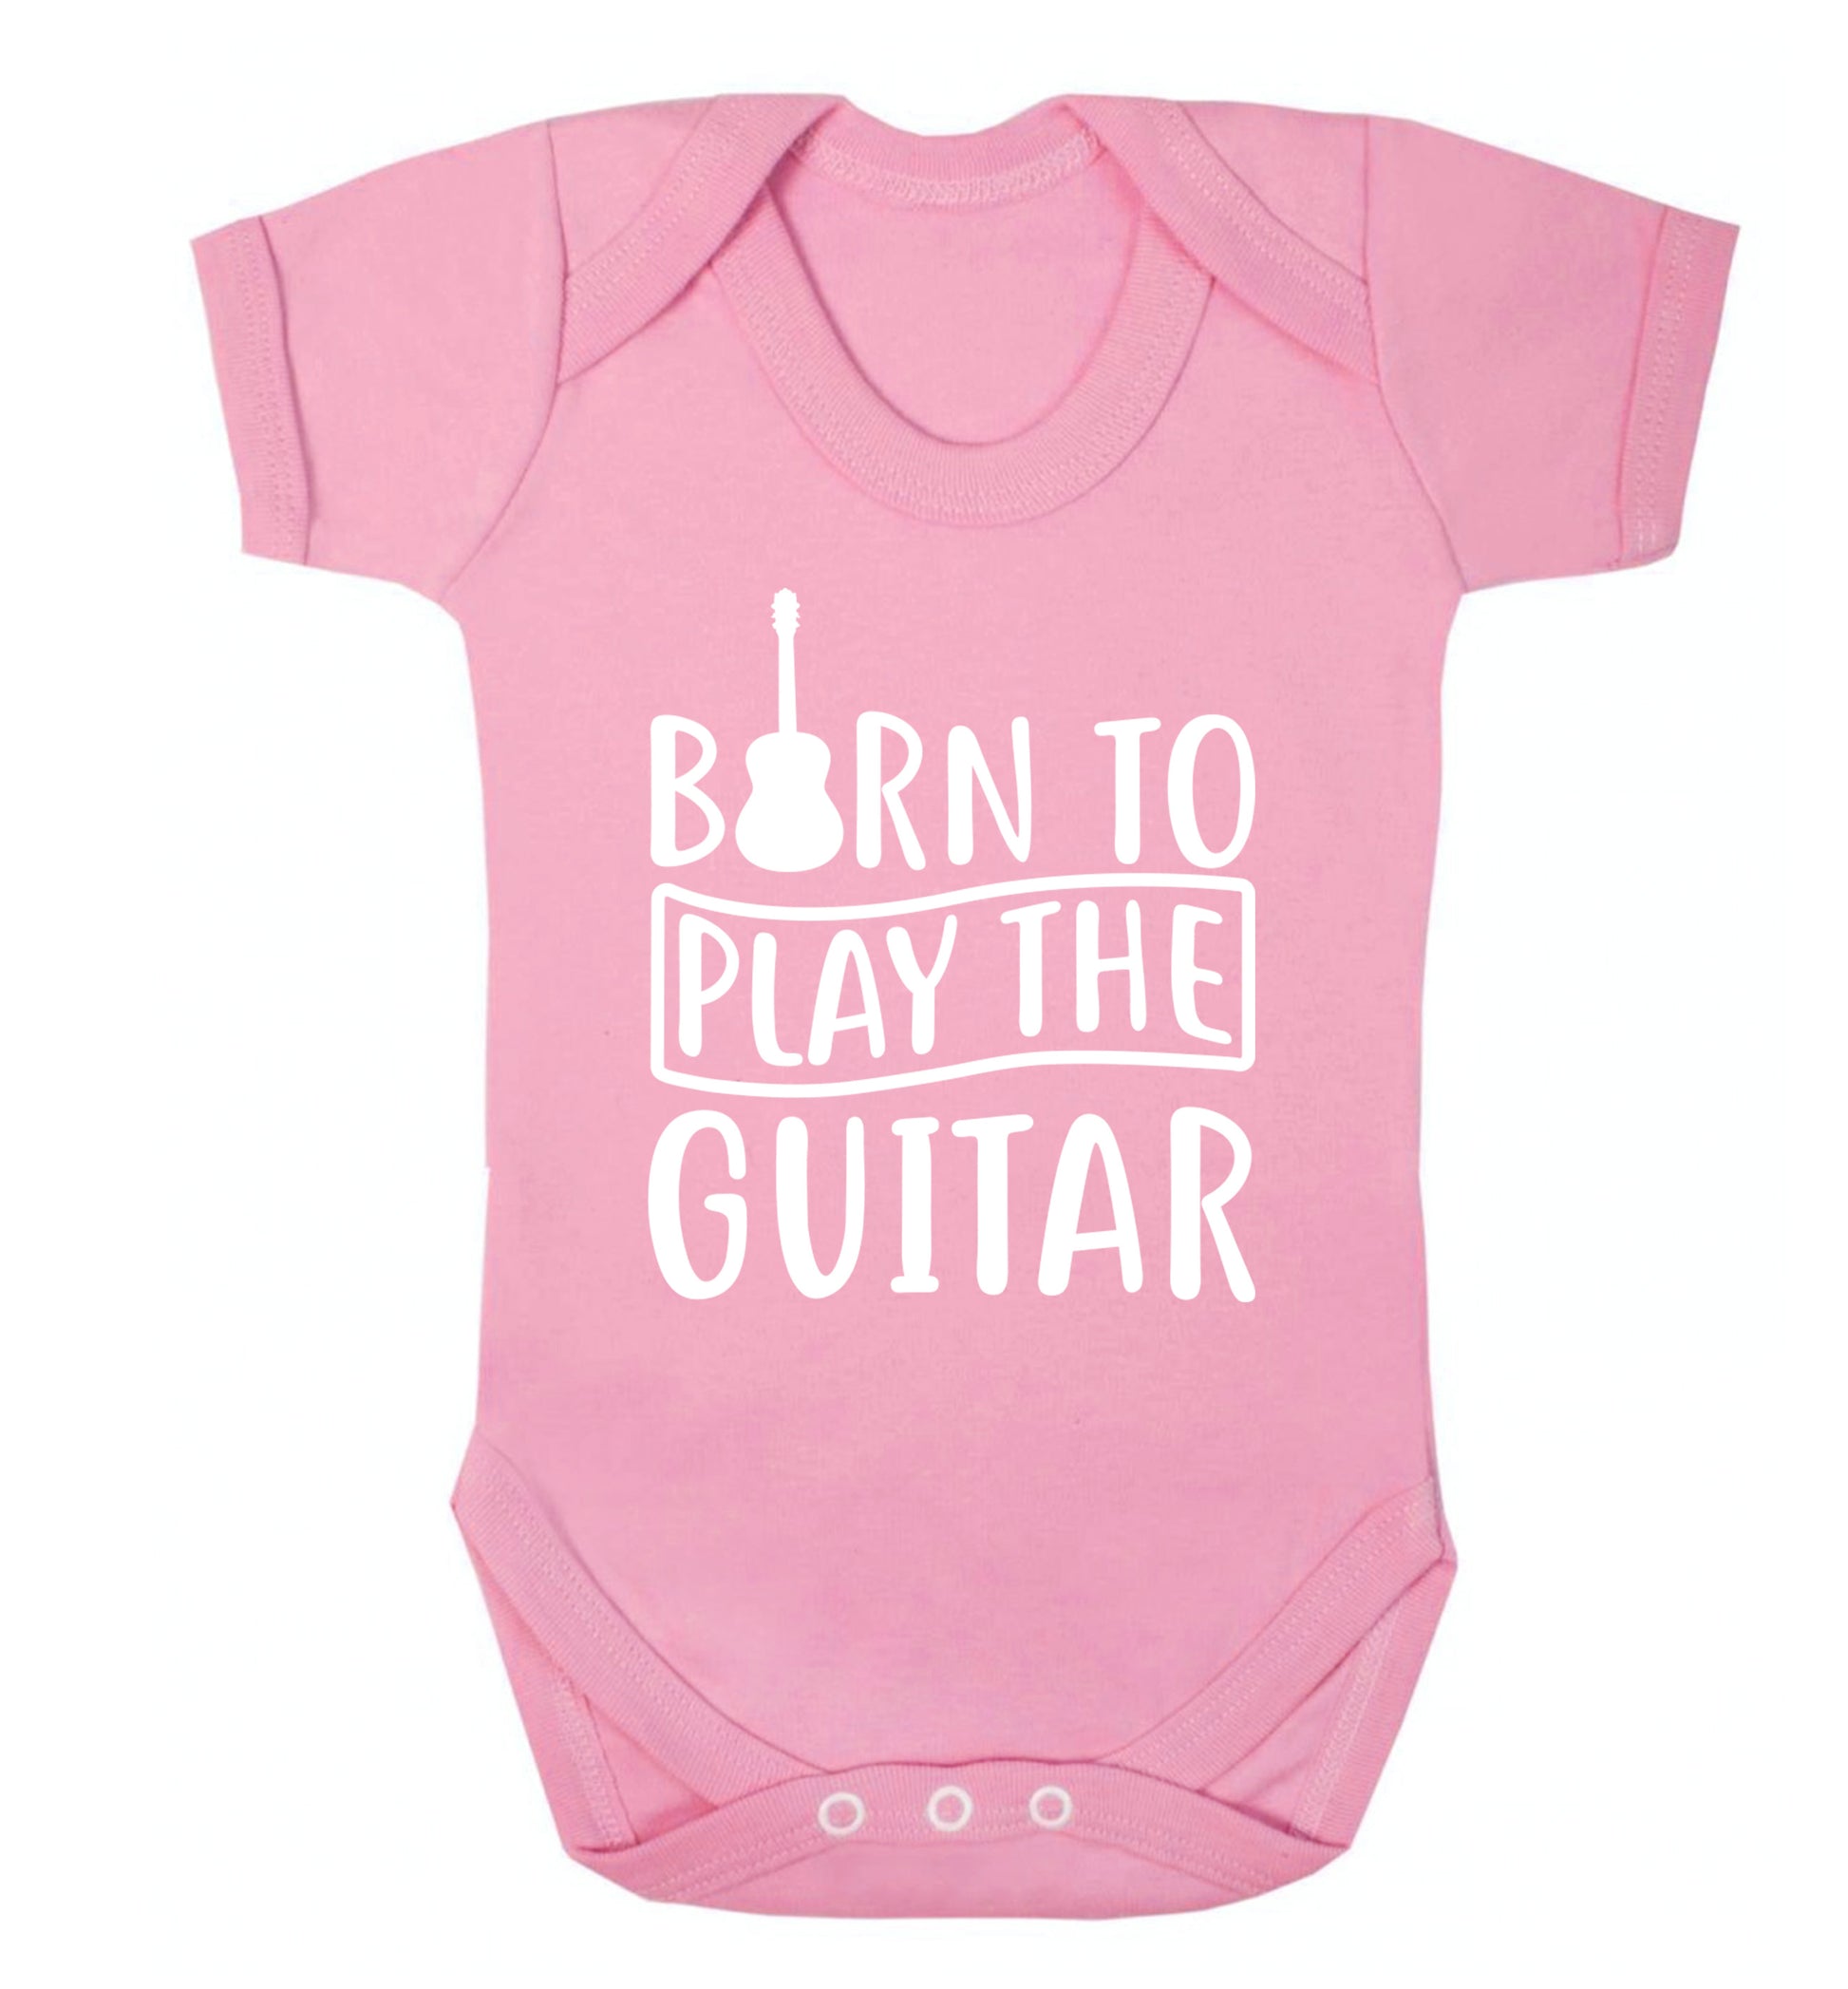 Born to play the guitar Baby Vest pale pink 18-24 months